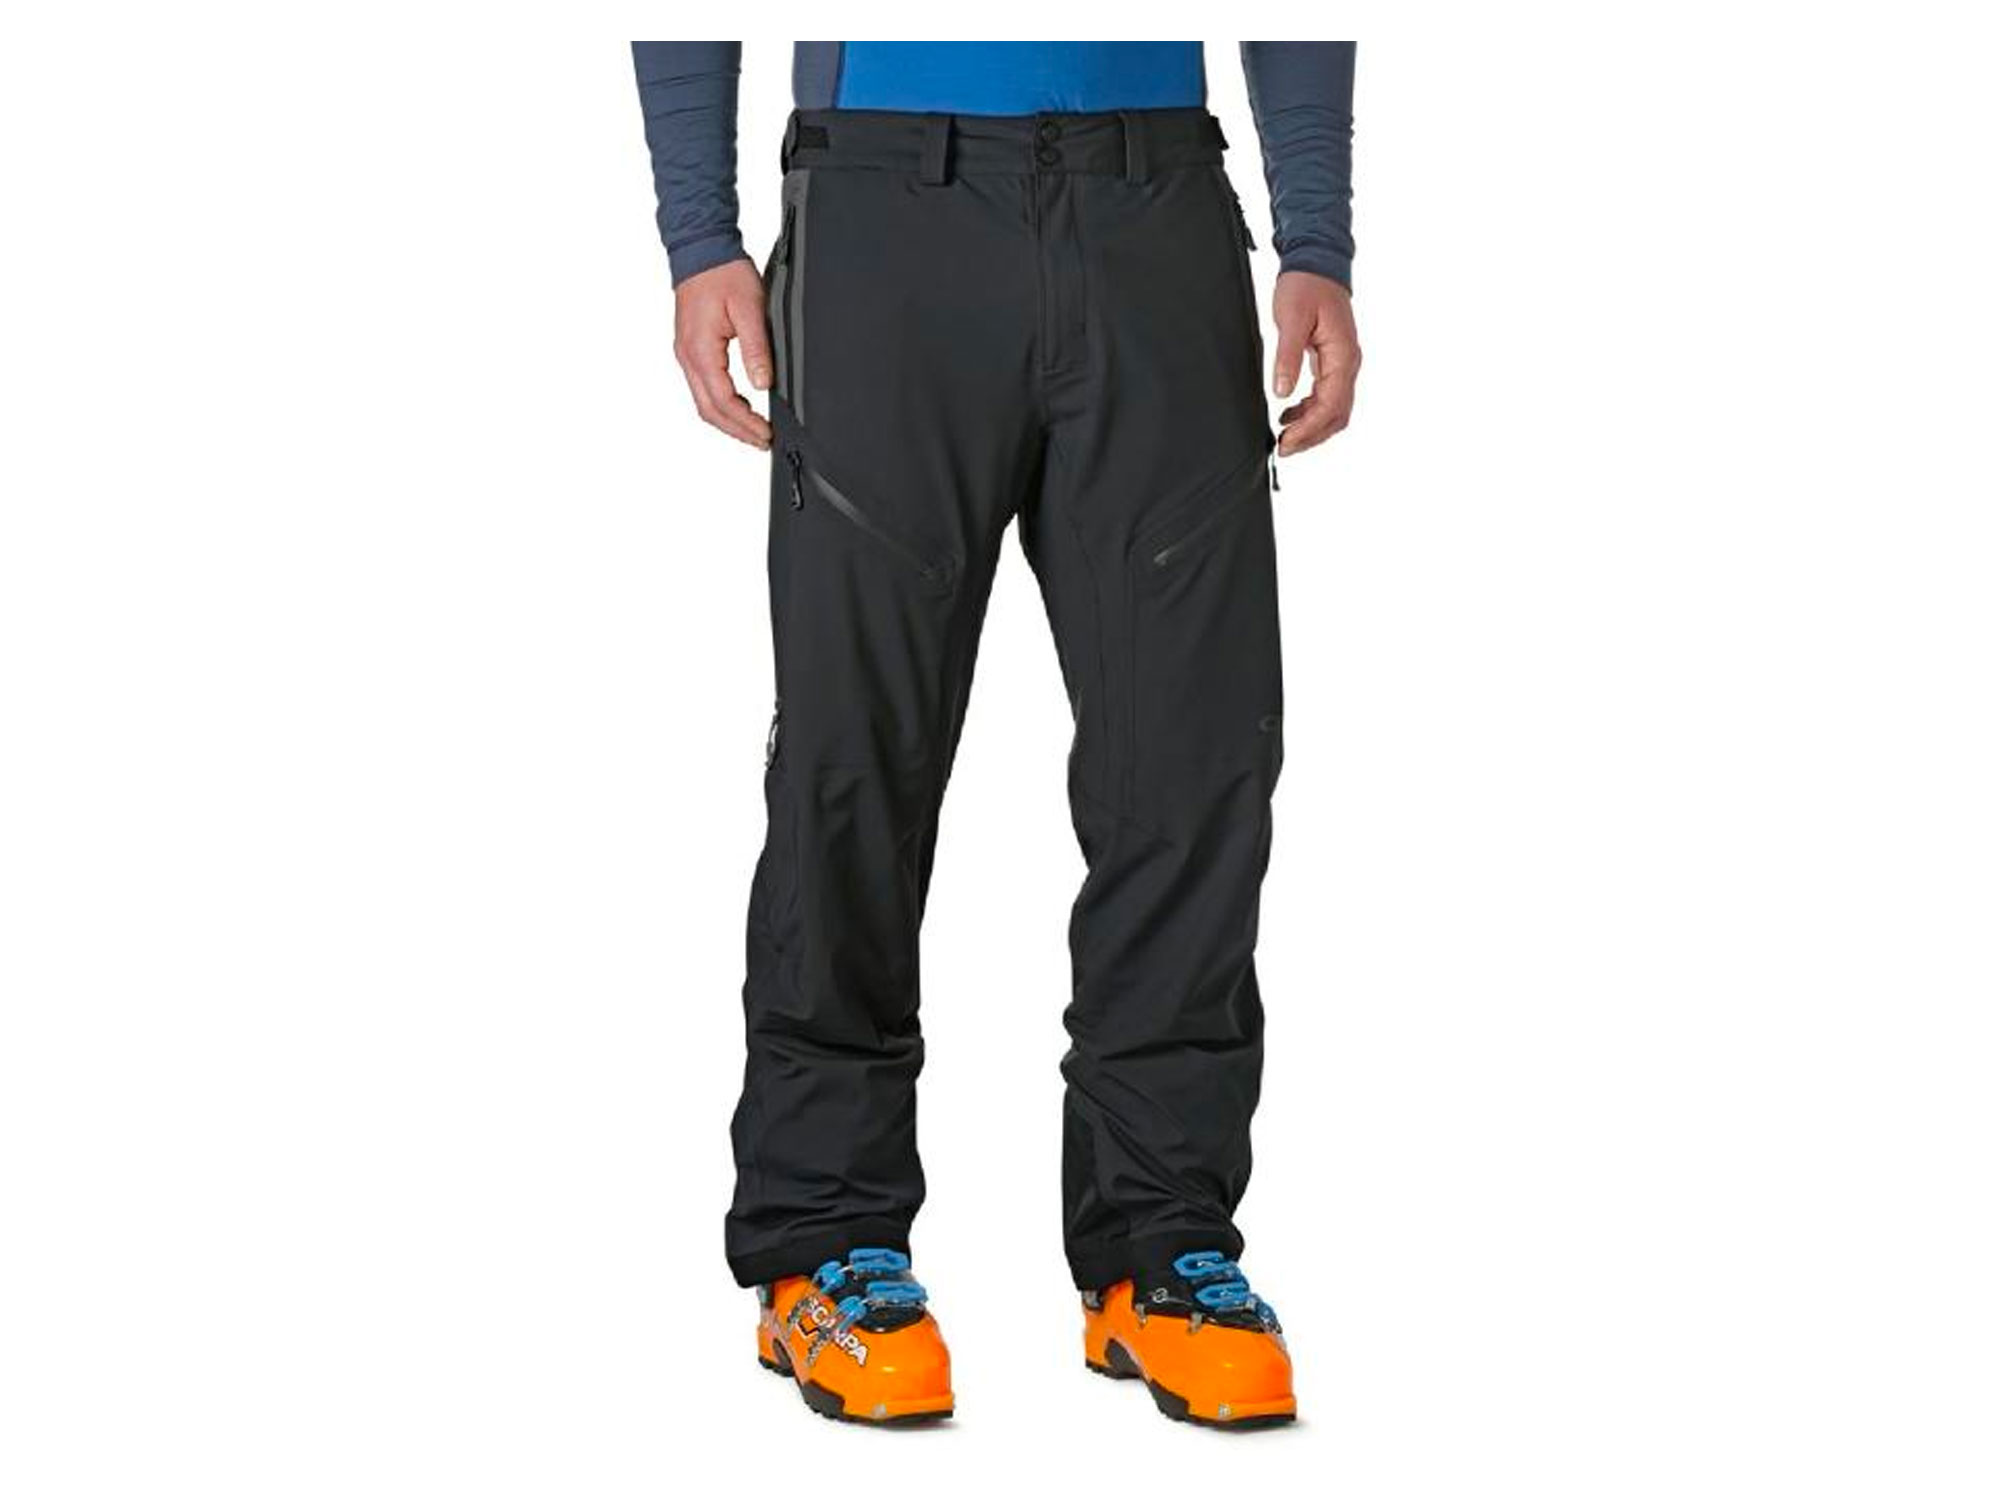 Best Ski Pants for Downhill Skiing, Backcountry & More | Outdoor Life